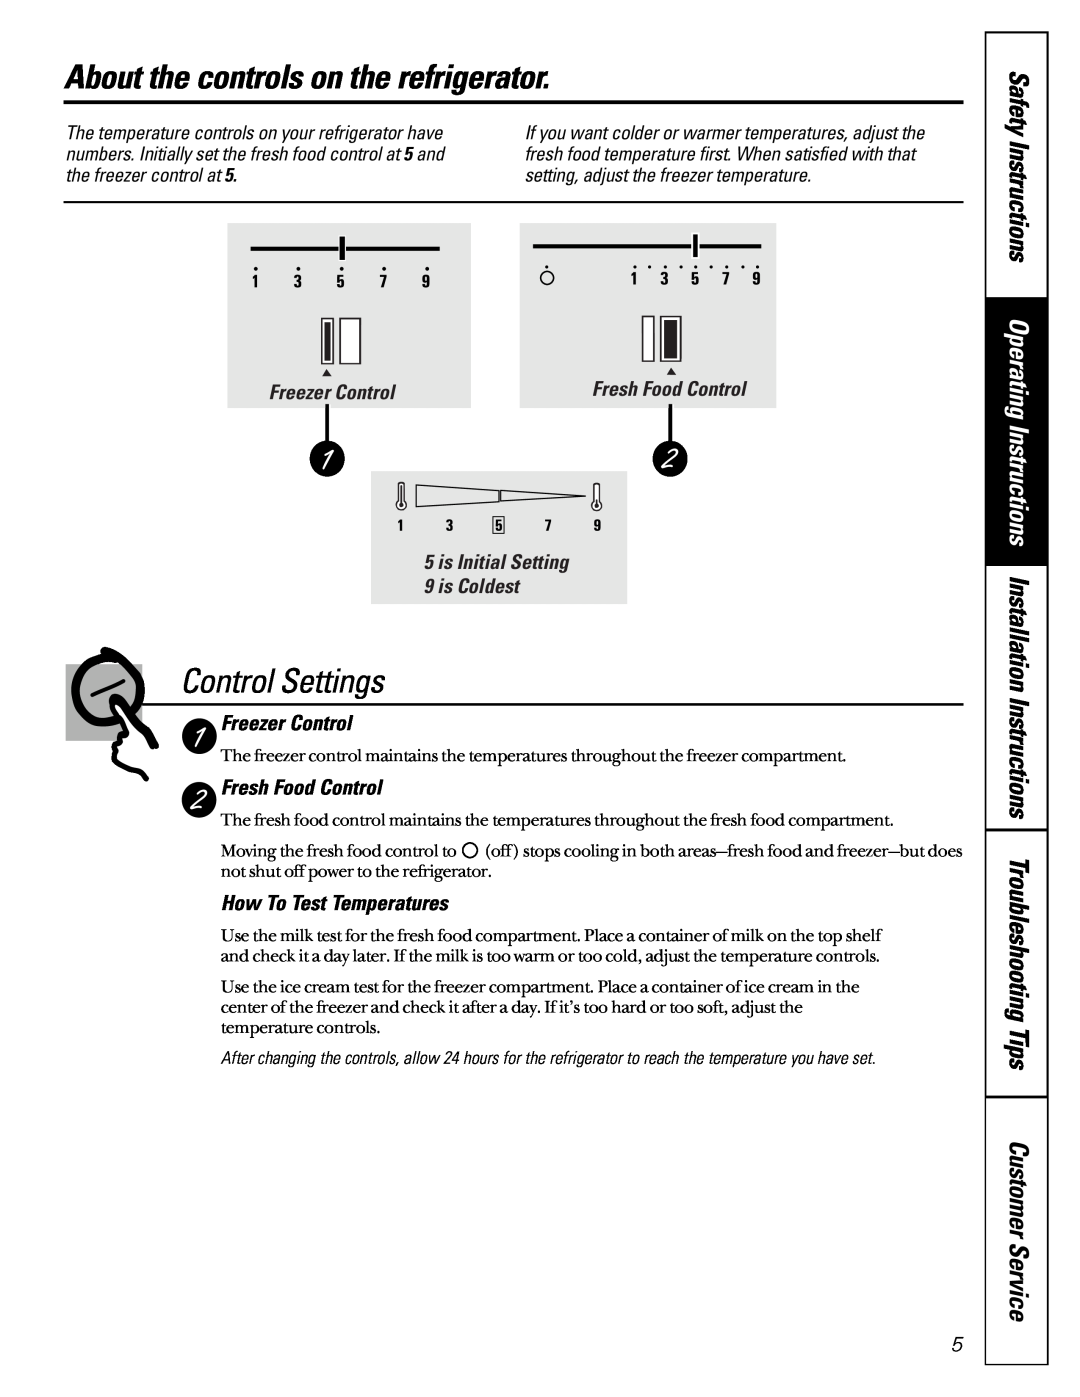 GE 162D7744P009 owner manual About the controls on the refrigerator, Control Settings, Freezer Control, Fresh Food Control 